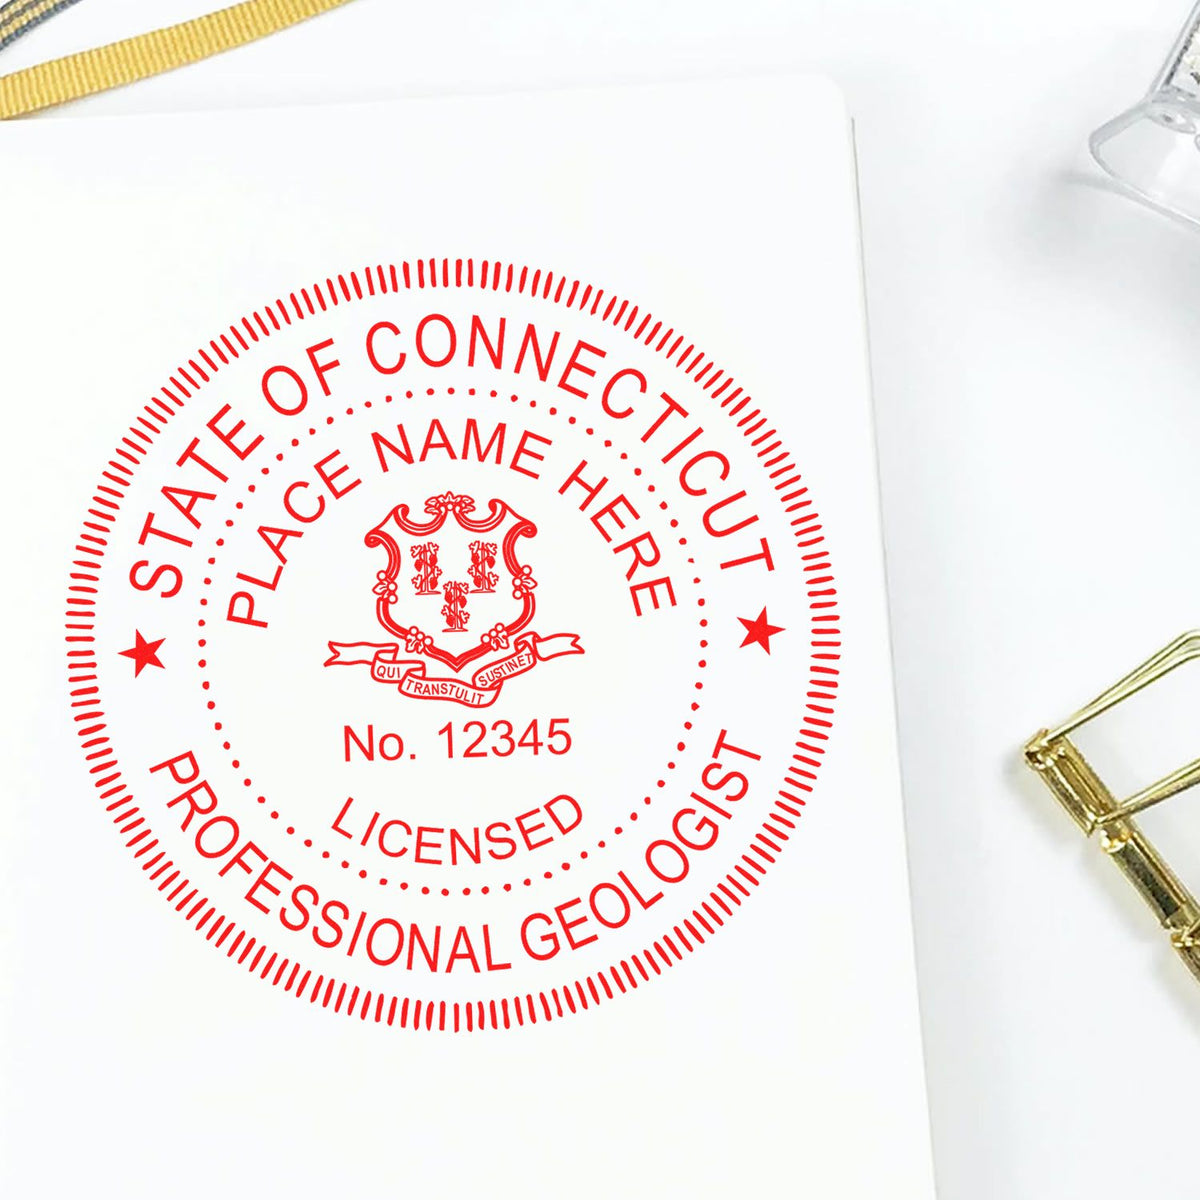 An in use photo of the Slim Pre-Inked Connecticut Professional Geologist Seal Stamp showing a sample imprint on a cardstock